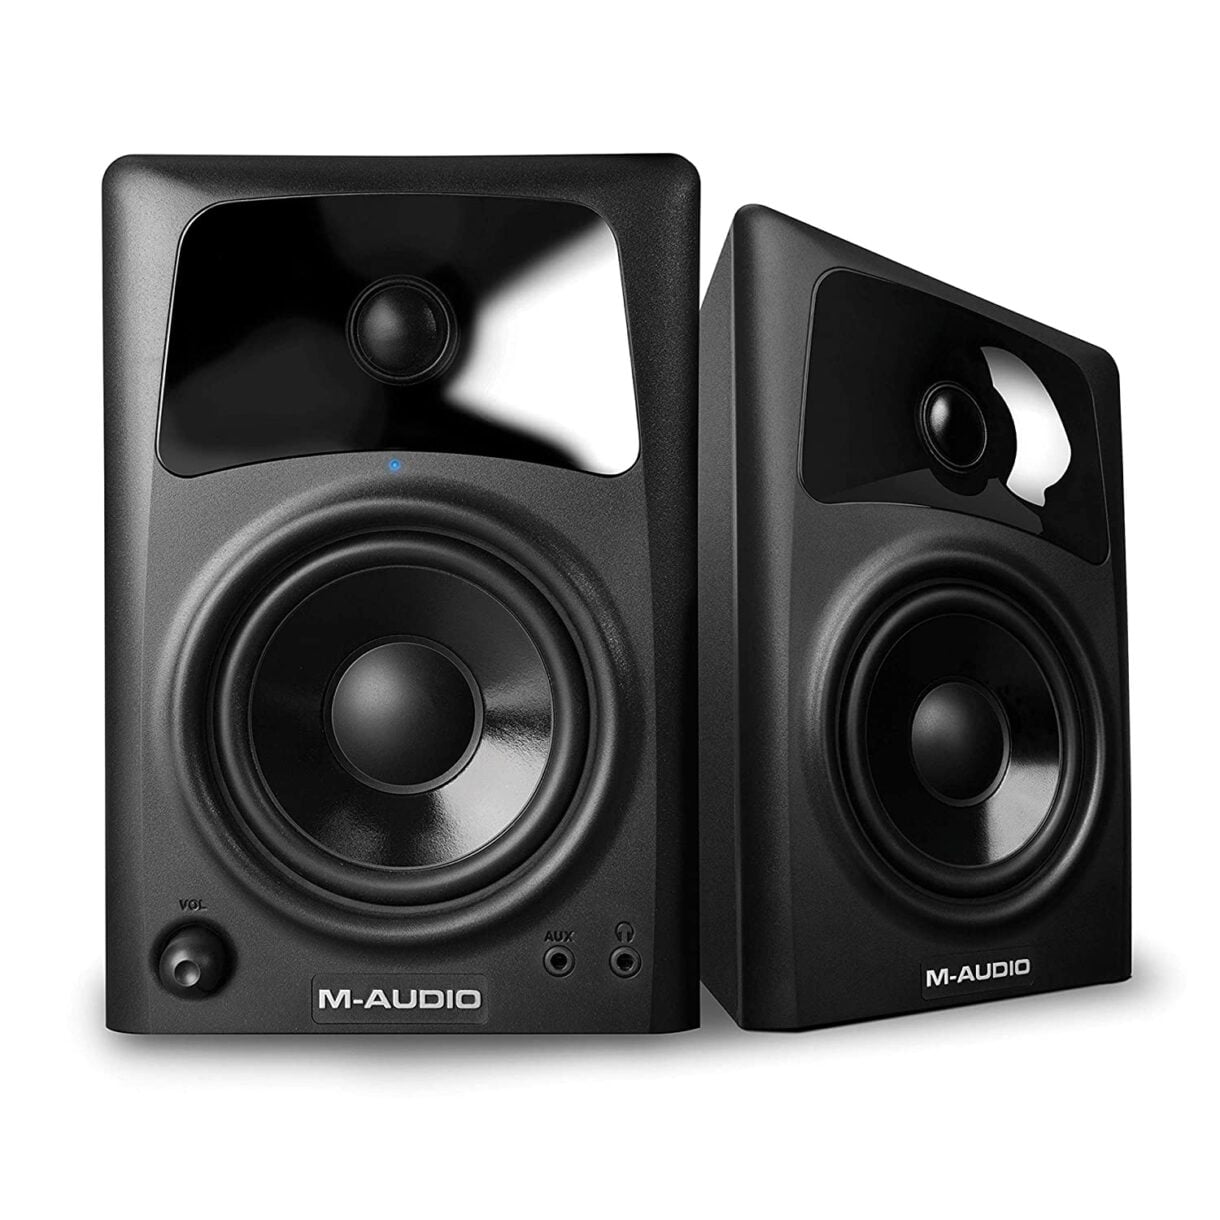 M-Audio AV42 Pair of Active Desktop Reference Speakers for Media Creation and Immersive Sound Experiences